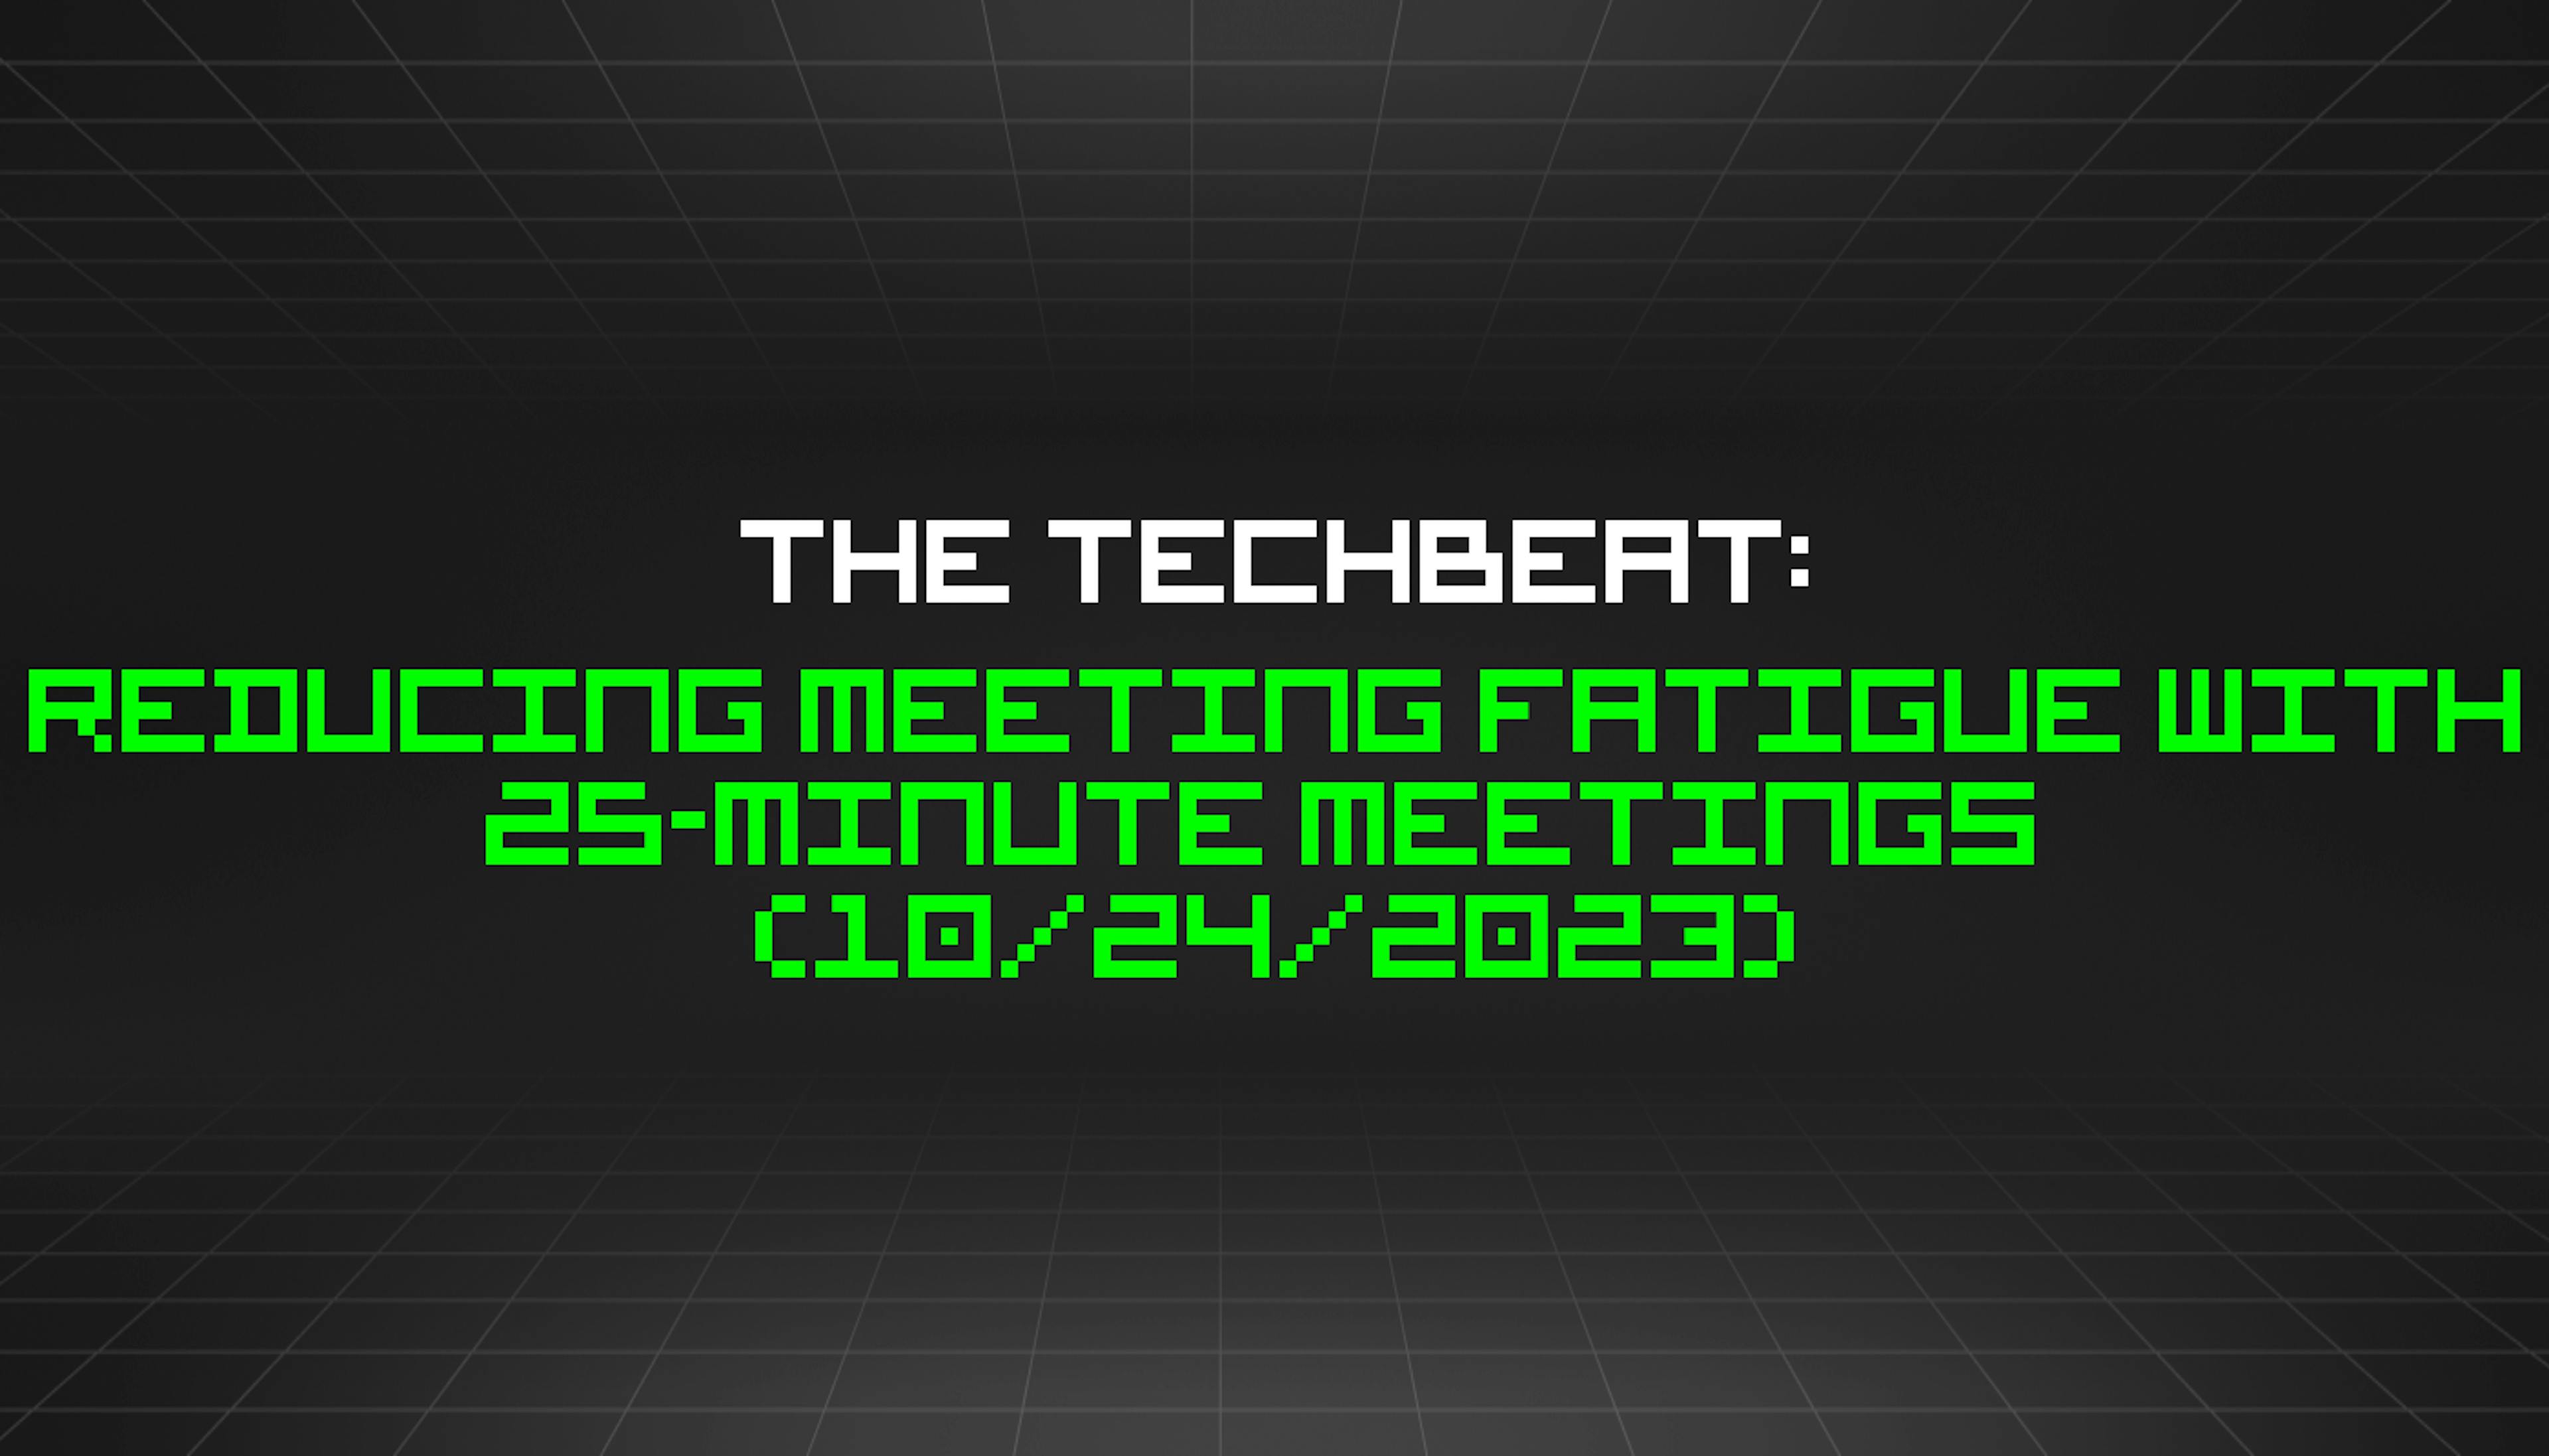 featured image - The TechBeat: Reducing Meeting Fatigue With 25-minute Meetings  (10/24/2023)